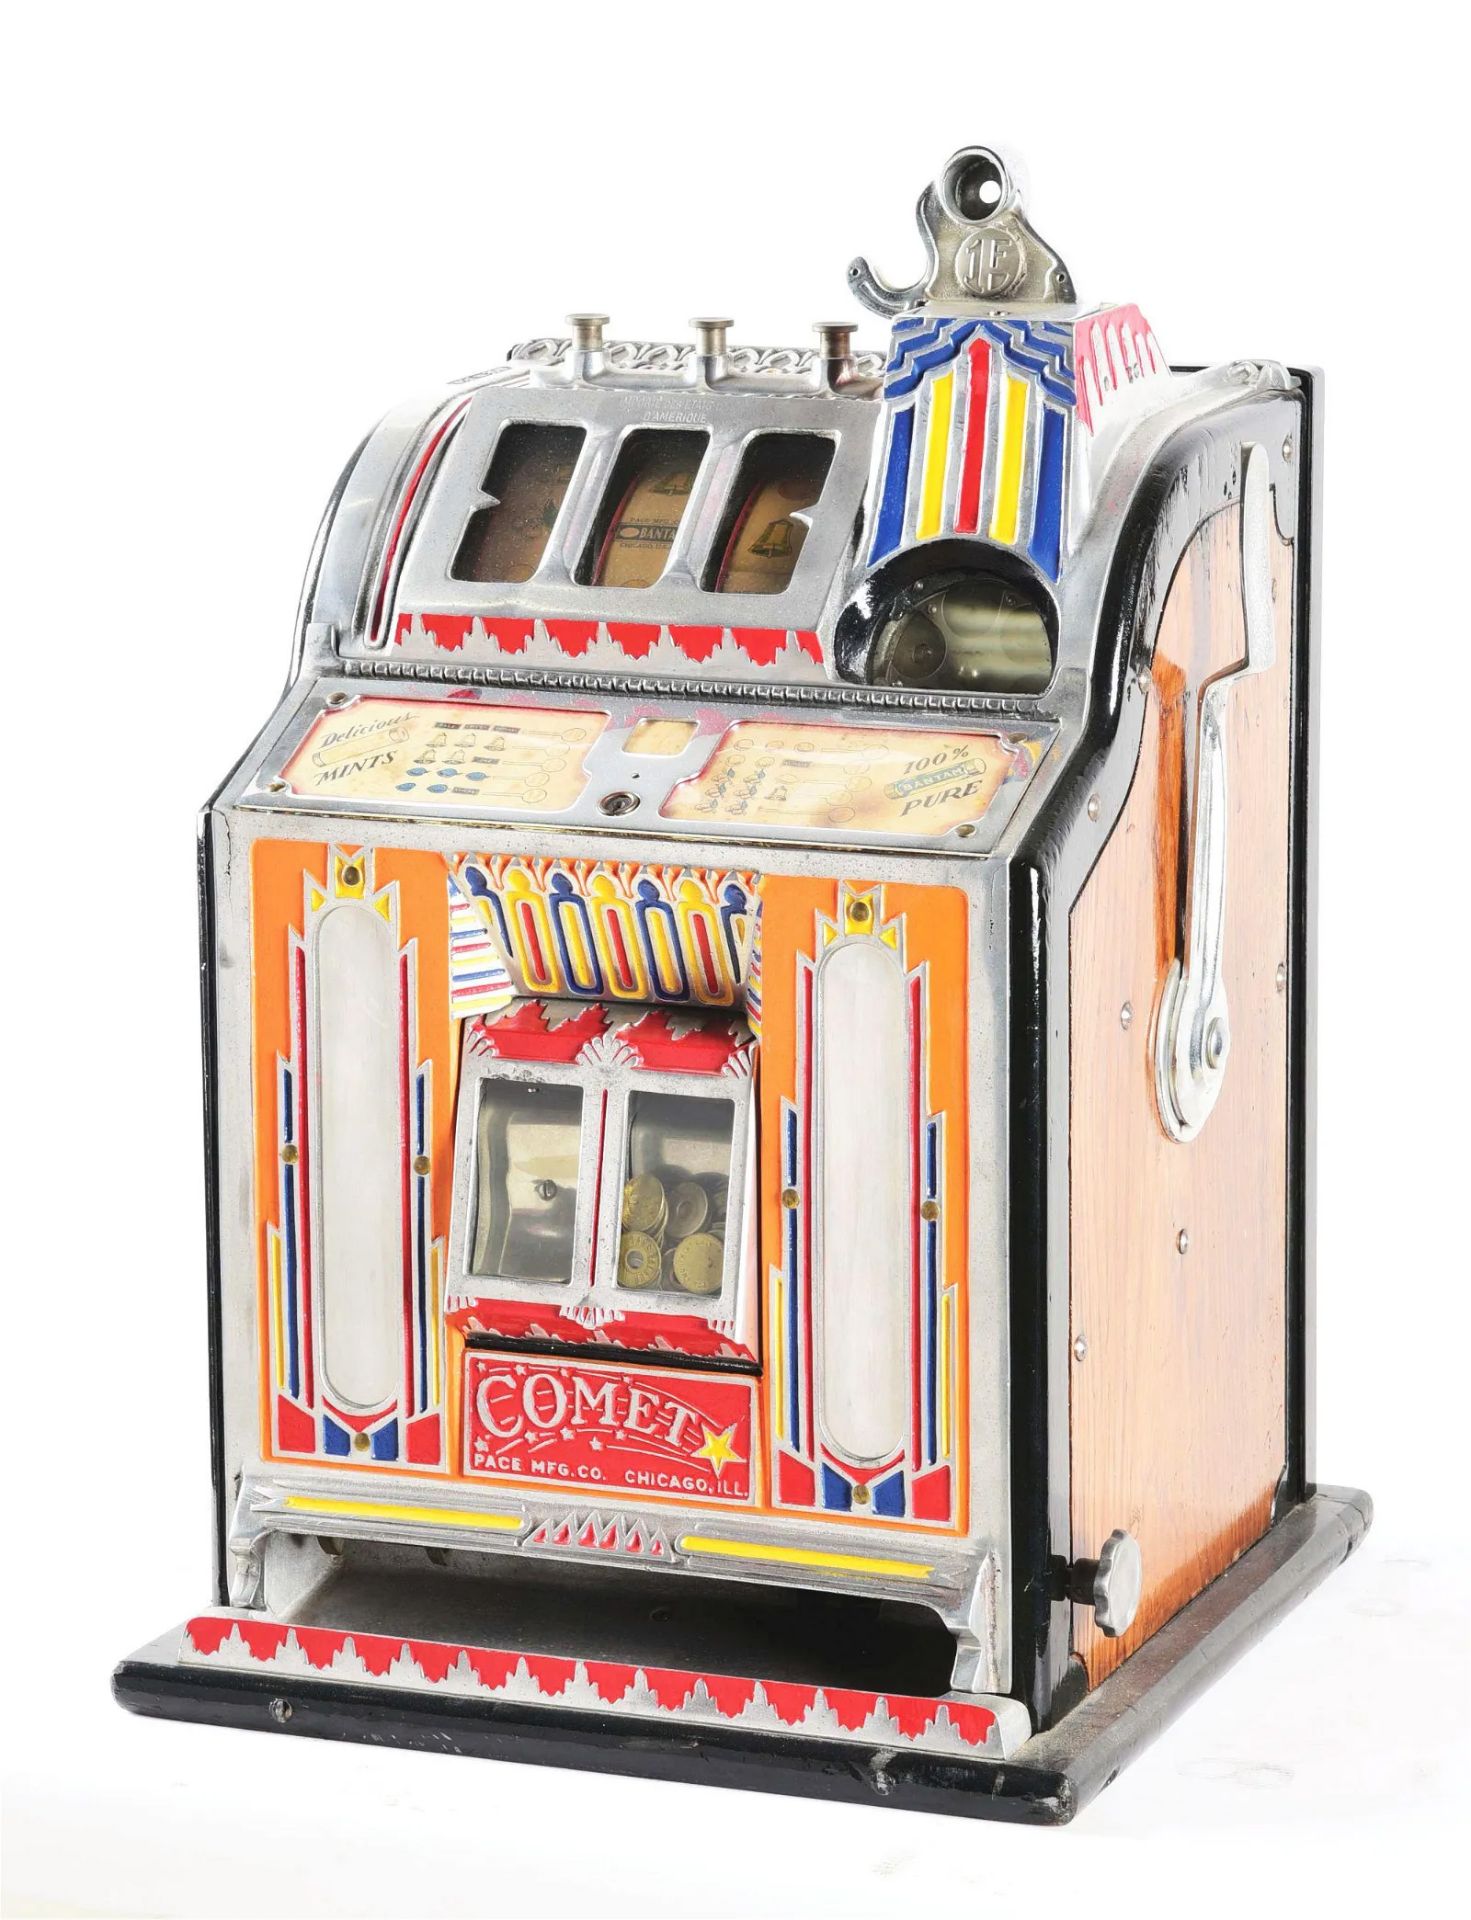 1 Franc Pace Comet Slot Machine With Skill Stop - Image 3 of 5